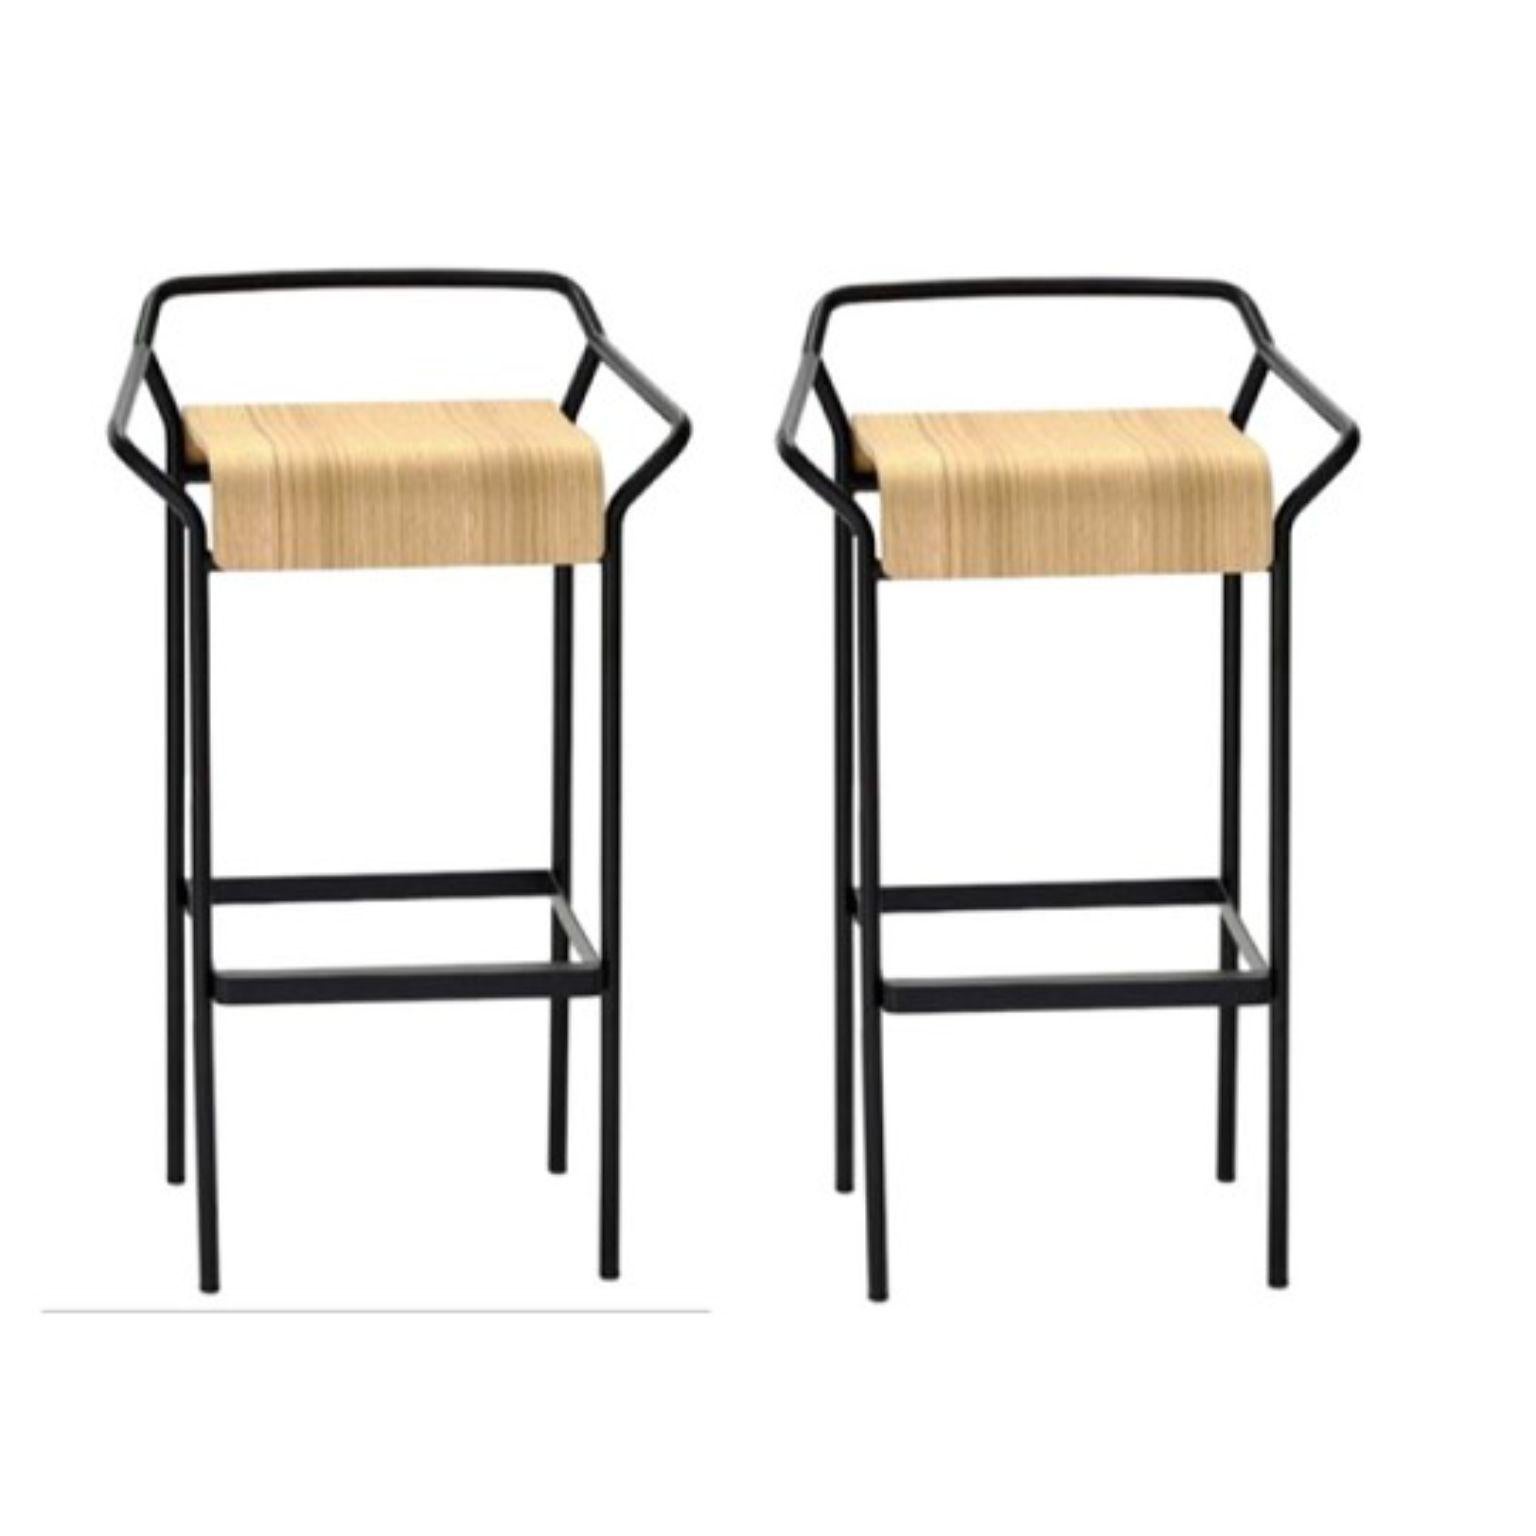 Set of 2 DAO High Stools by Shin Azumi
Materials: Barstool, structure in black or white lacquered metal. Seat in oak veneer or black lacquer on plywood.
Technique: Lacquered metal, natural and stained wood. 
Dimensions: W 49 x D 40 x H 86